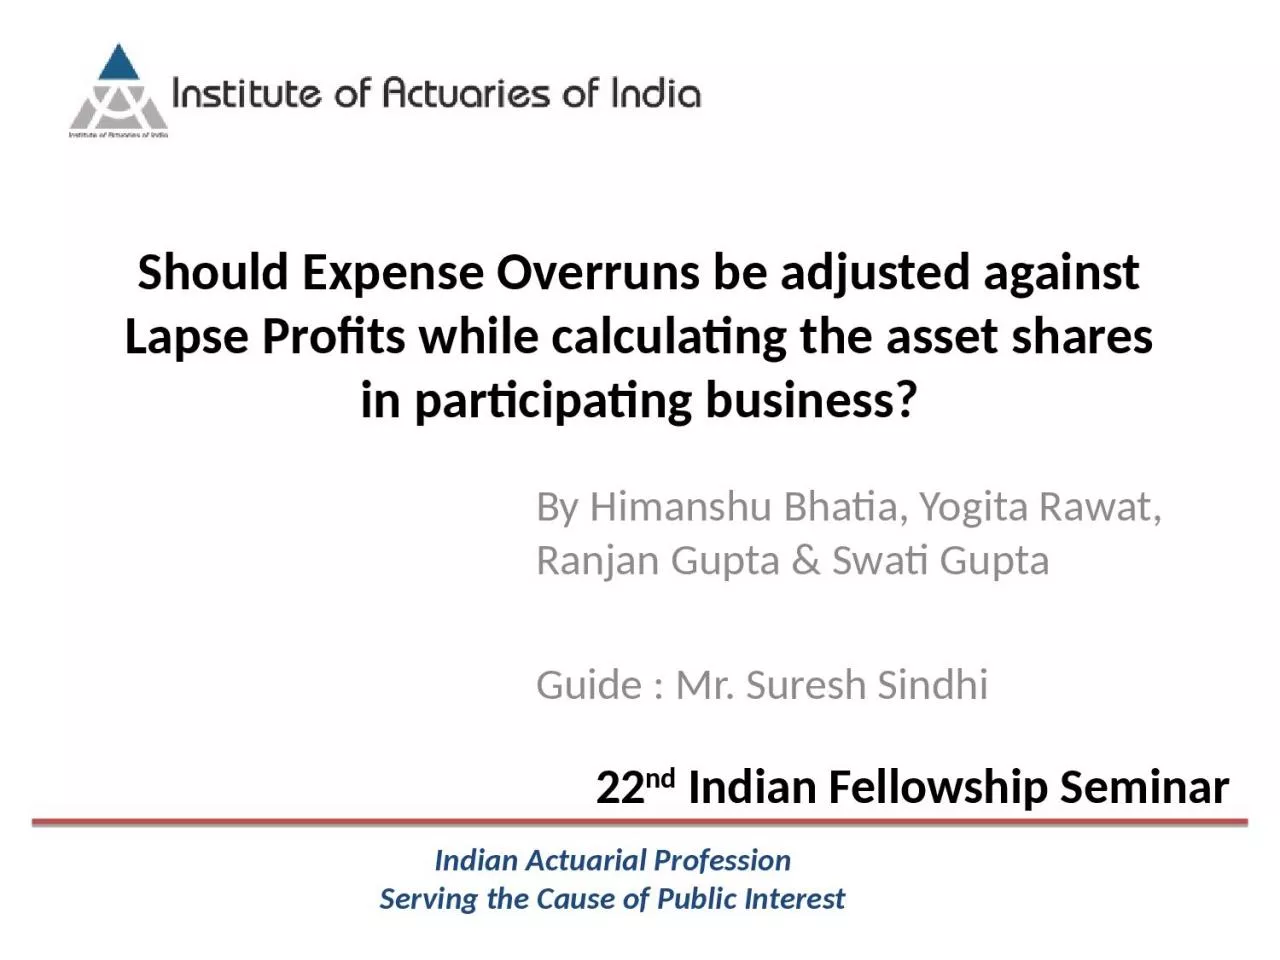 Should Expense Overruns be adjusted against Lapse Profits while calculating the asset